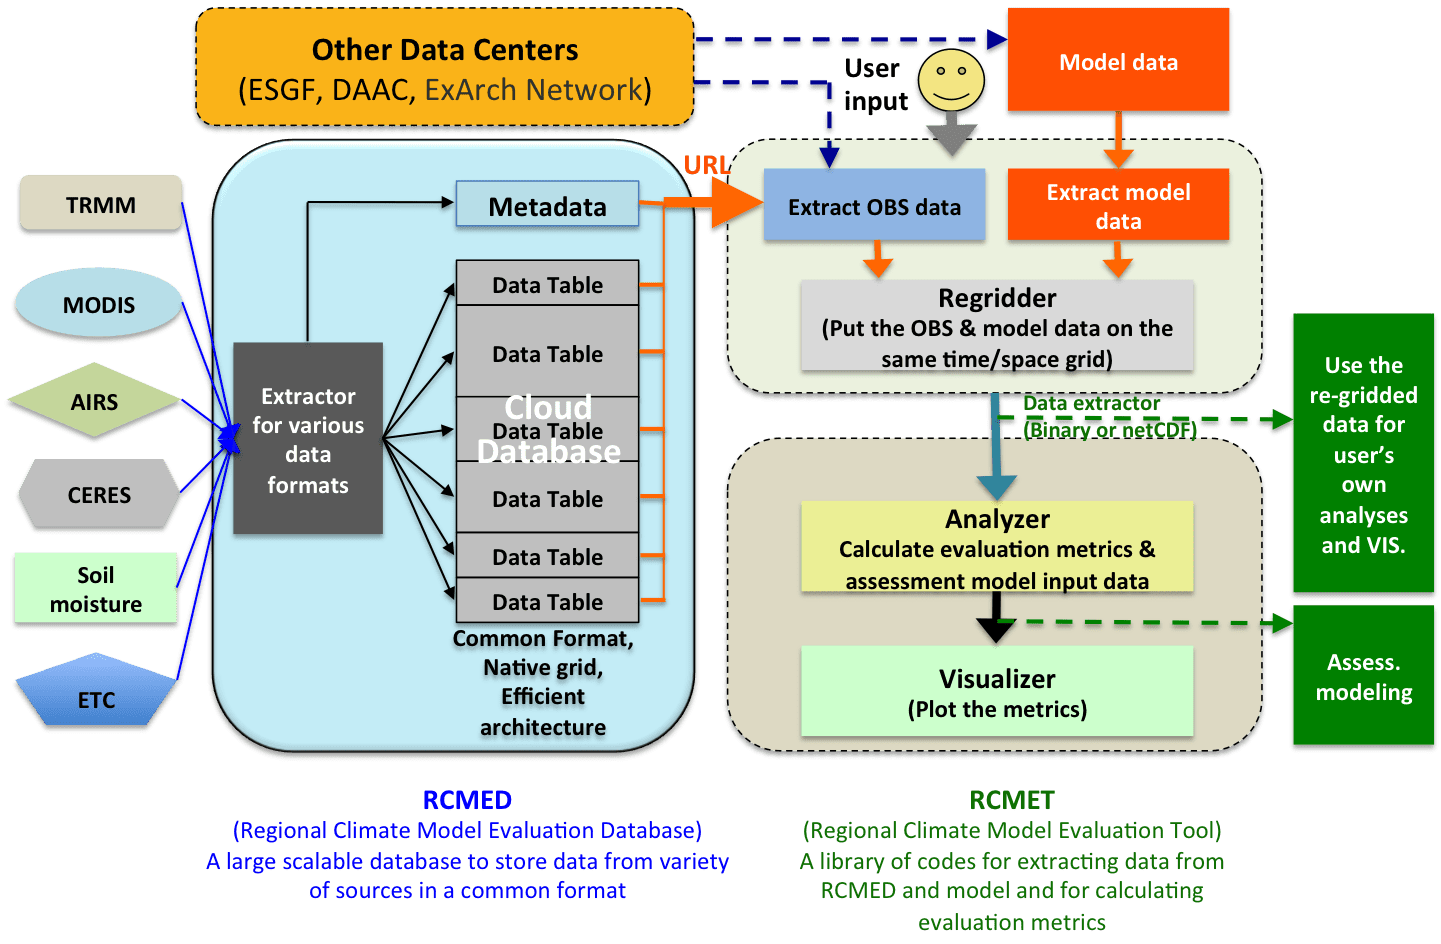 Figure 2. The architecture of the regional climate model evaluation system. Image Credit: C. Mattmann.